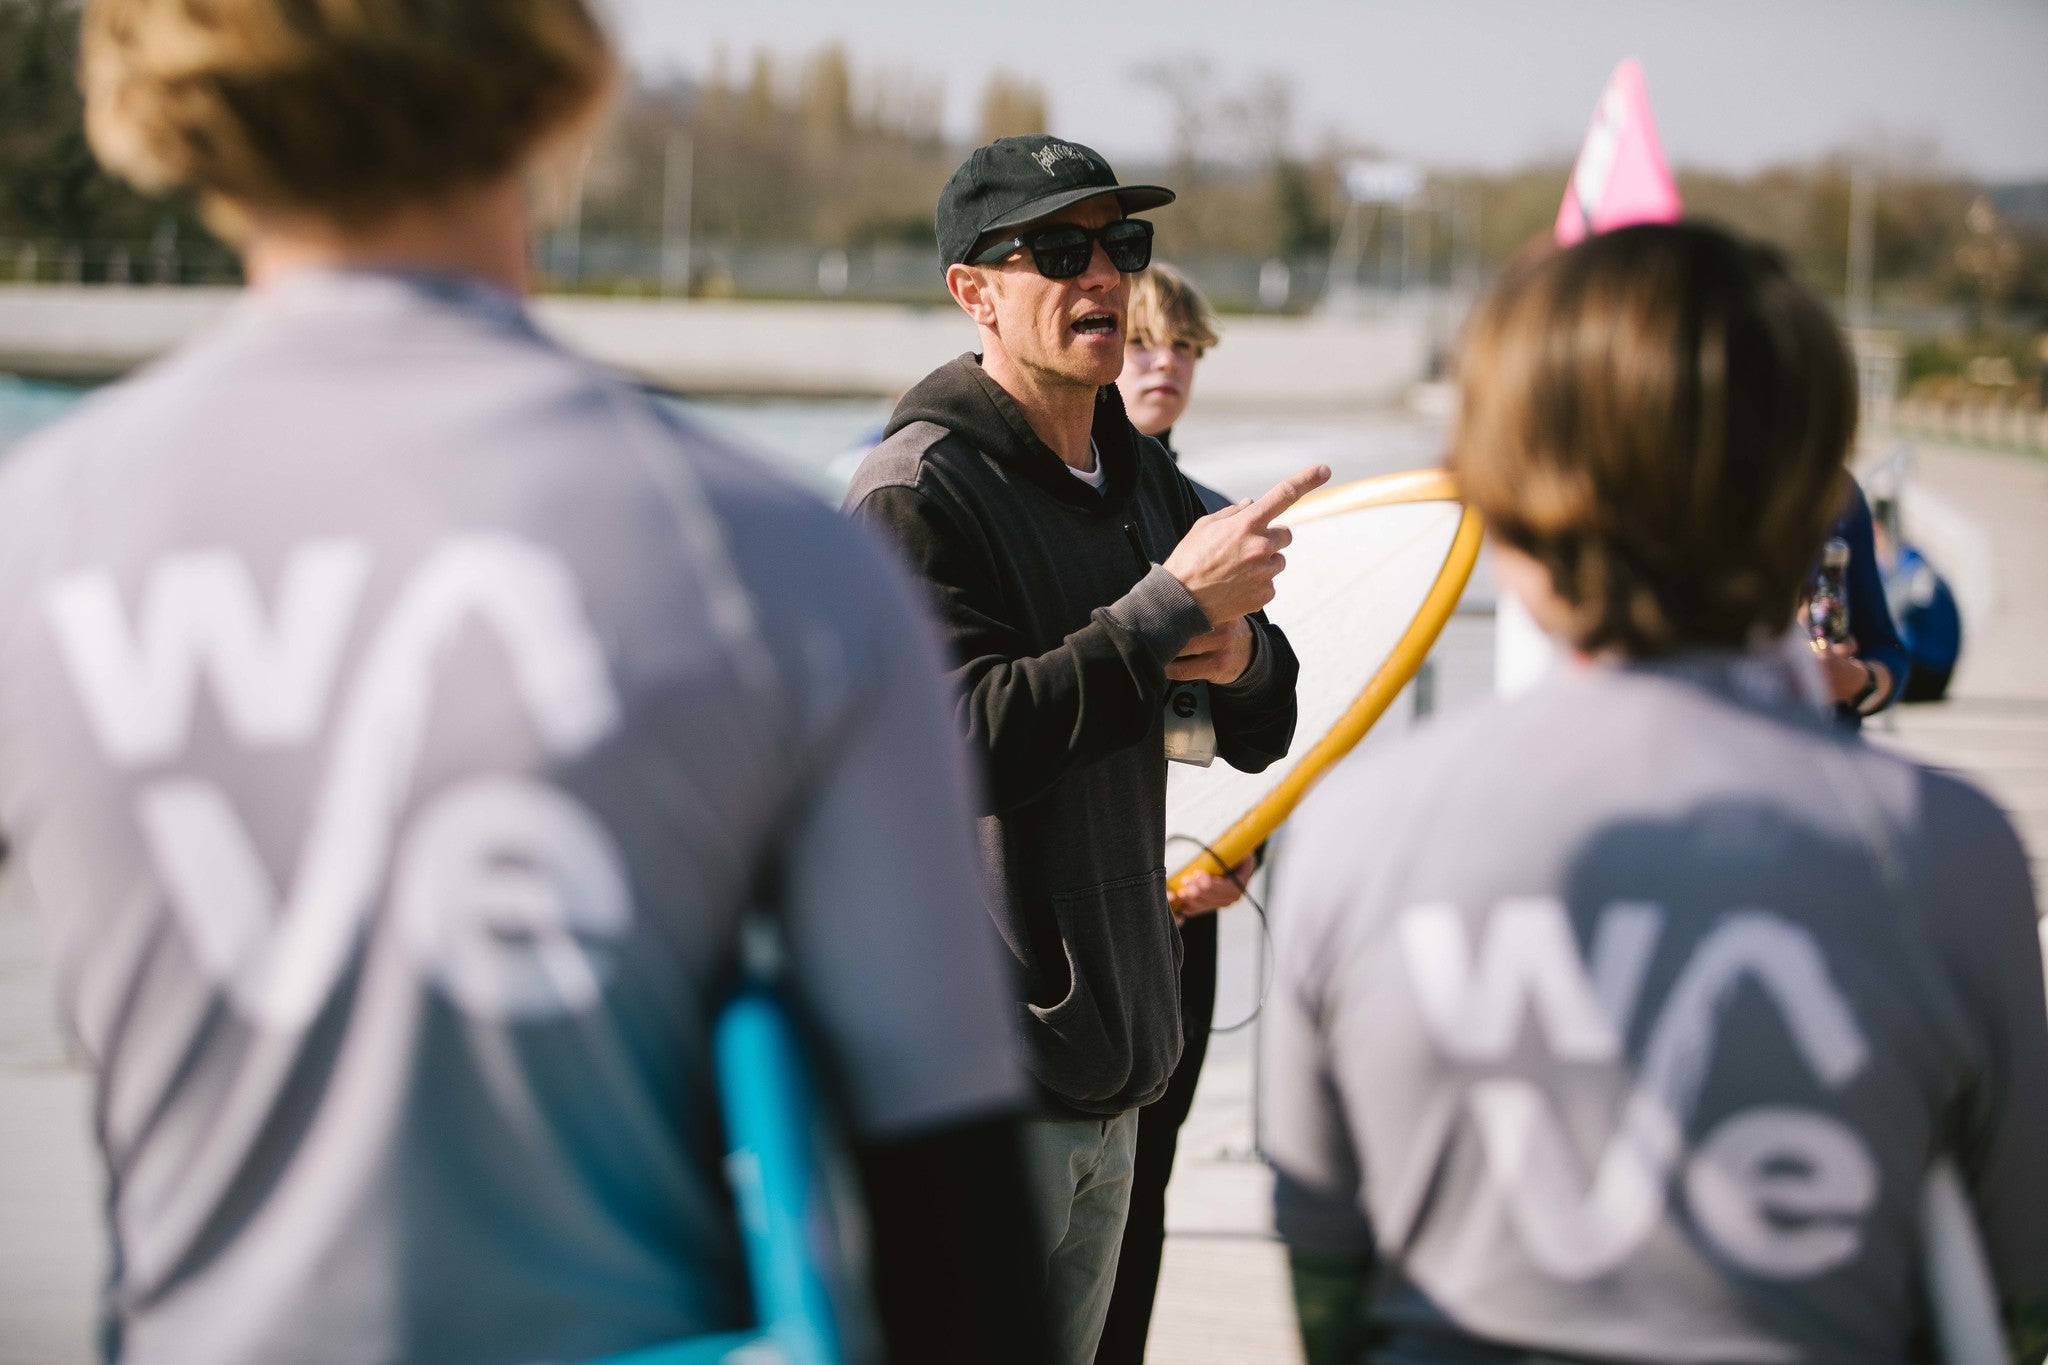 Team England coach instructing young surfers at The Wave